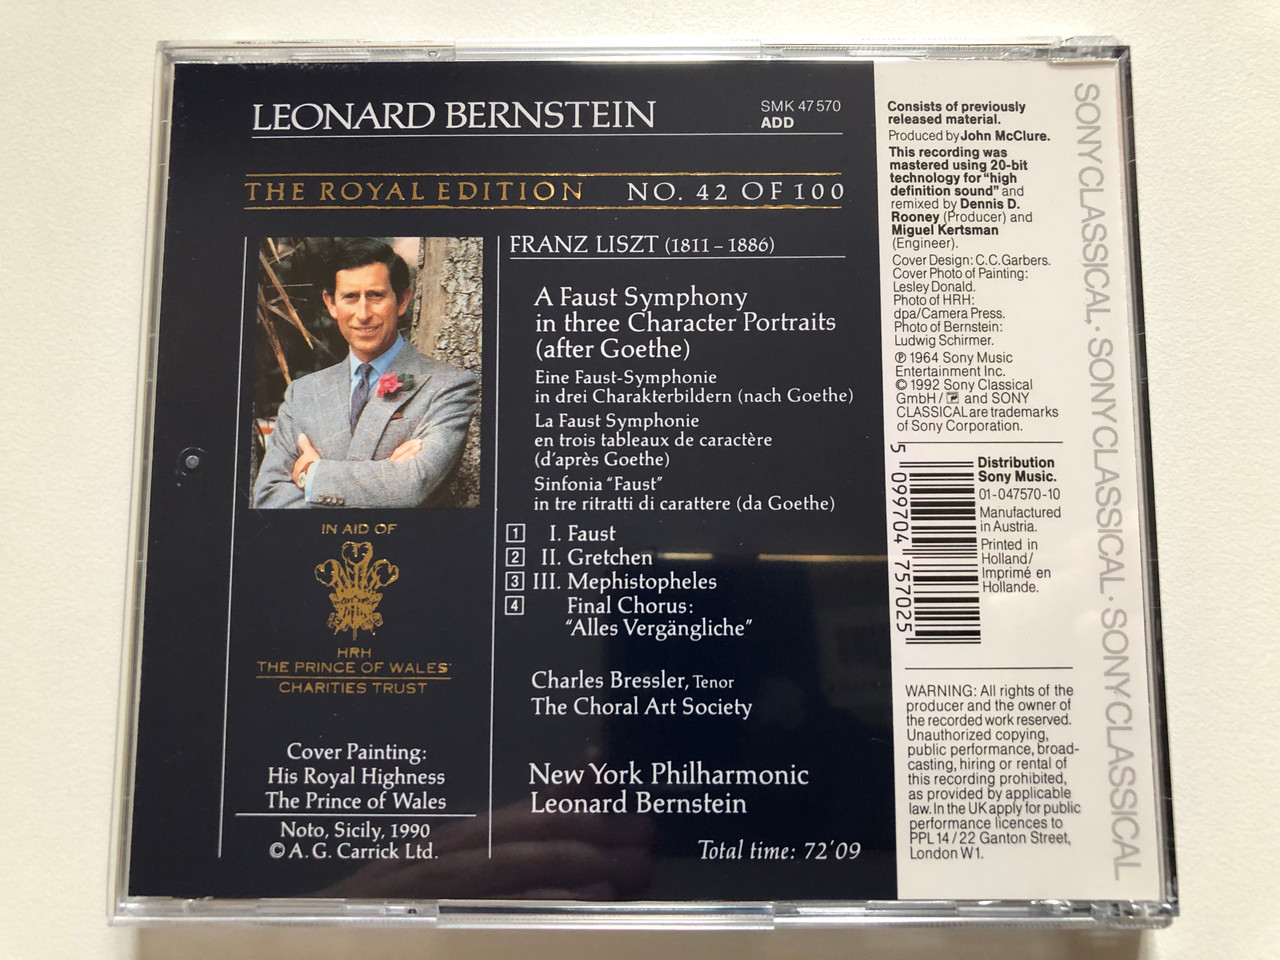 https://cdn10.bigcommerce.com/s-62bdpkt7pb/products/0/images/310954/Leonard_Bernstein_-_Liszt_A_Faust_Symphony_-_Charles_Bressler_The_Choral_Art_Society_New_York_Philharmonic_The_Royal_Edition_No._42_Of_100_Sony_Classical_Audio_CD_1992_SMK_47570_2__06014.1699461963.1280.1280.JPG?c=2